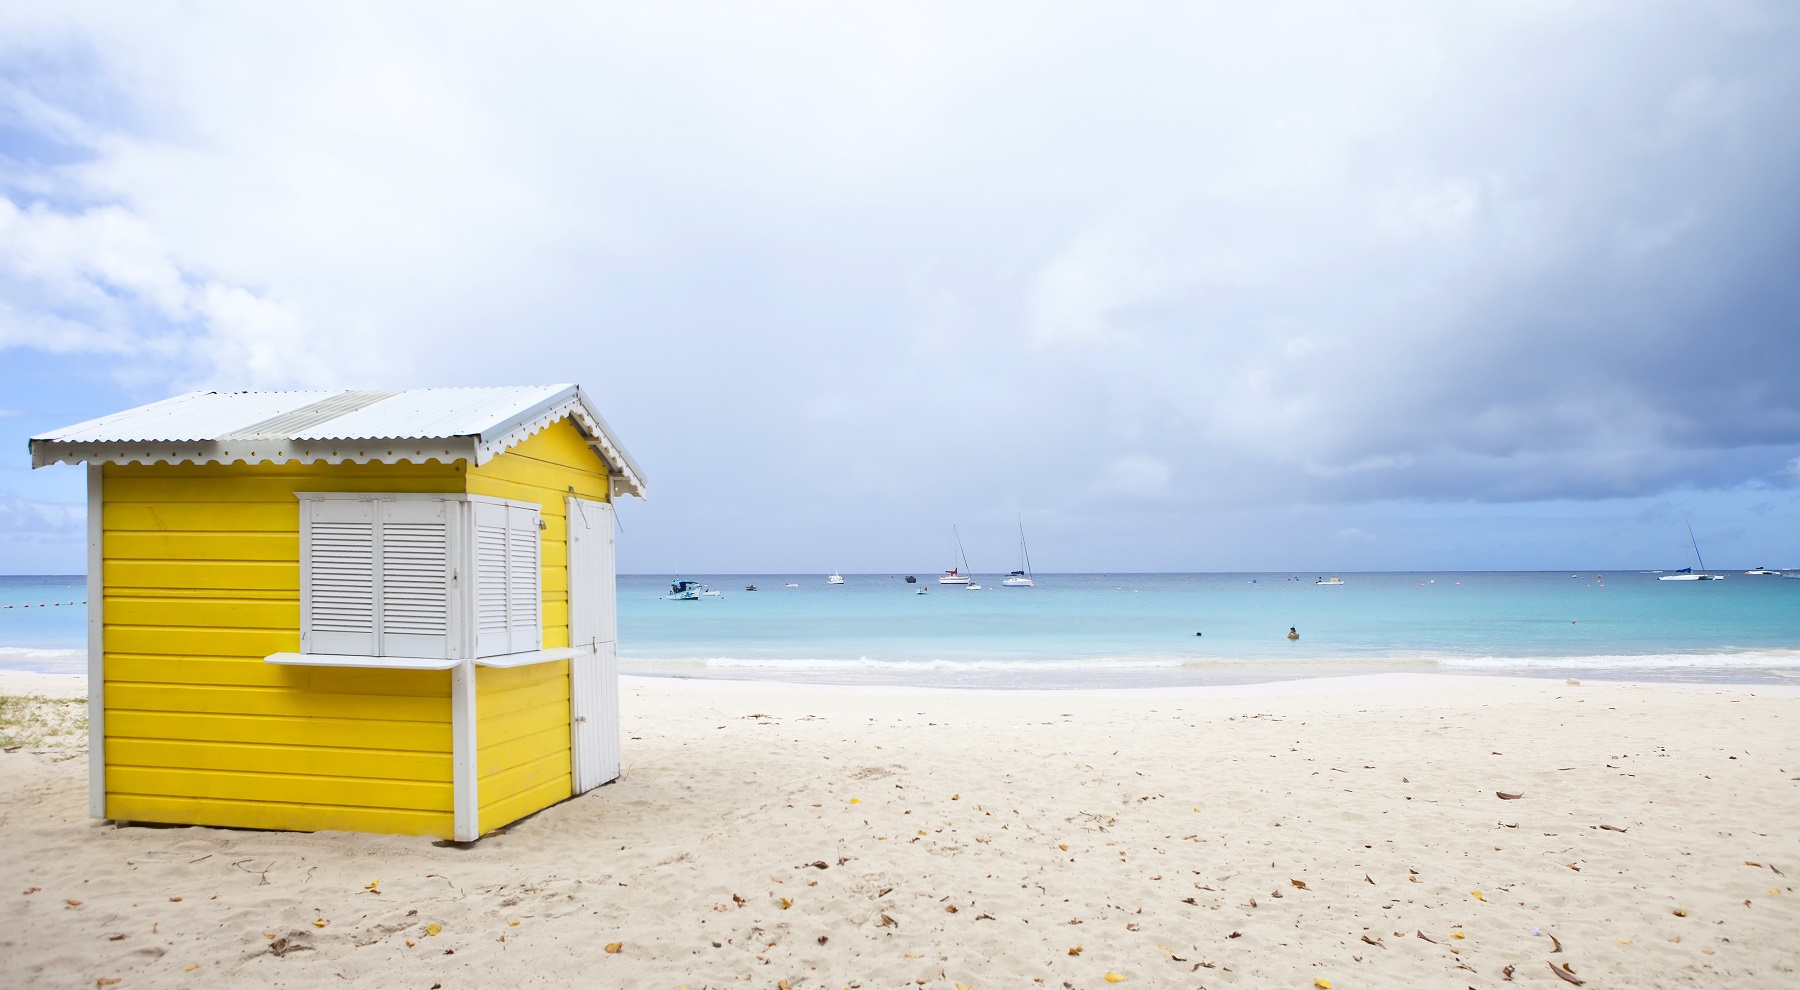 Barbados Plans to Offer 12-month Remote-work Stay Incentive to Attract Visitors